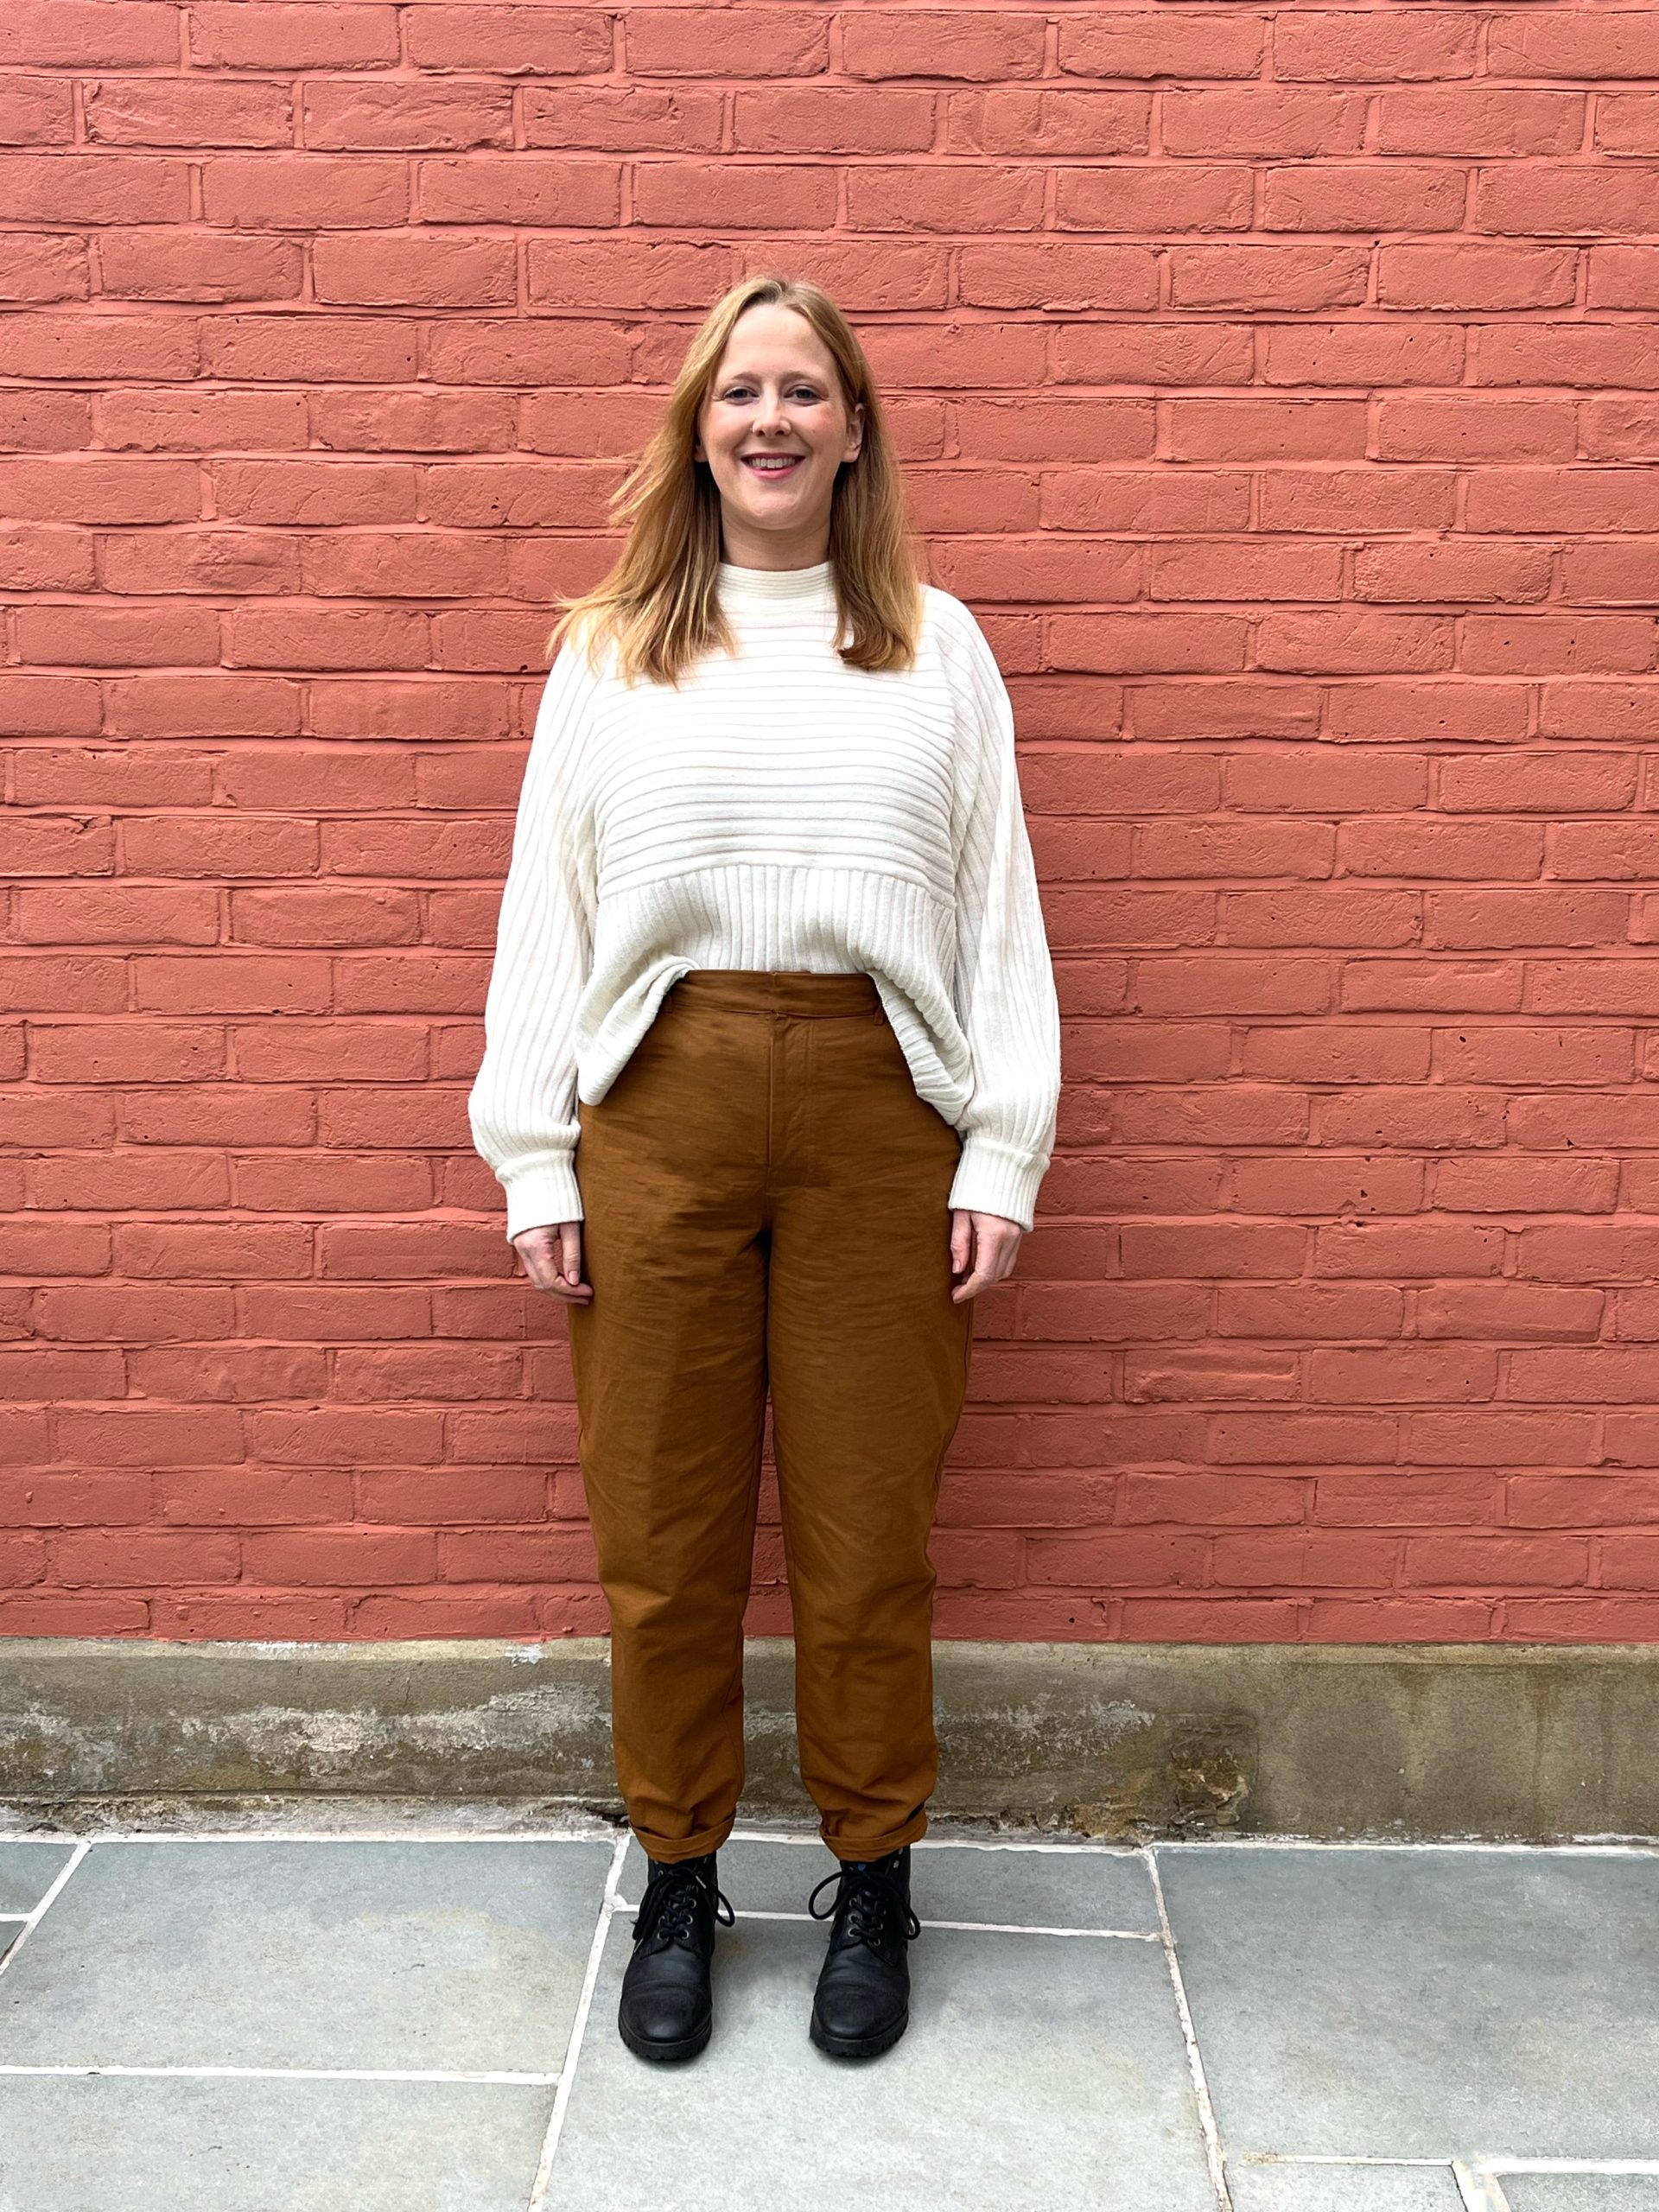 https://thefoldline.com/wp-content/uploads/2022/11/The-Modern-Sewing-Co-Worker-Trousers-sewing-pattern-Rachel-The-Fold-Line-1-2-scaled.jpg